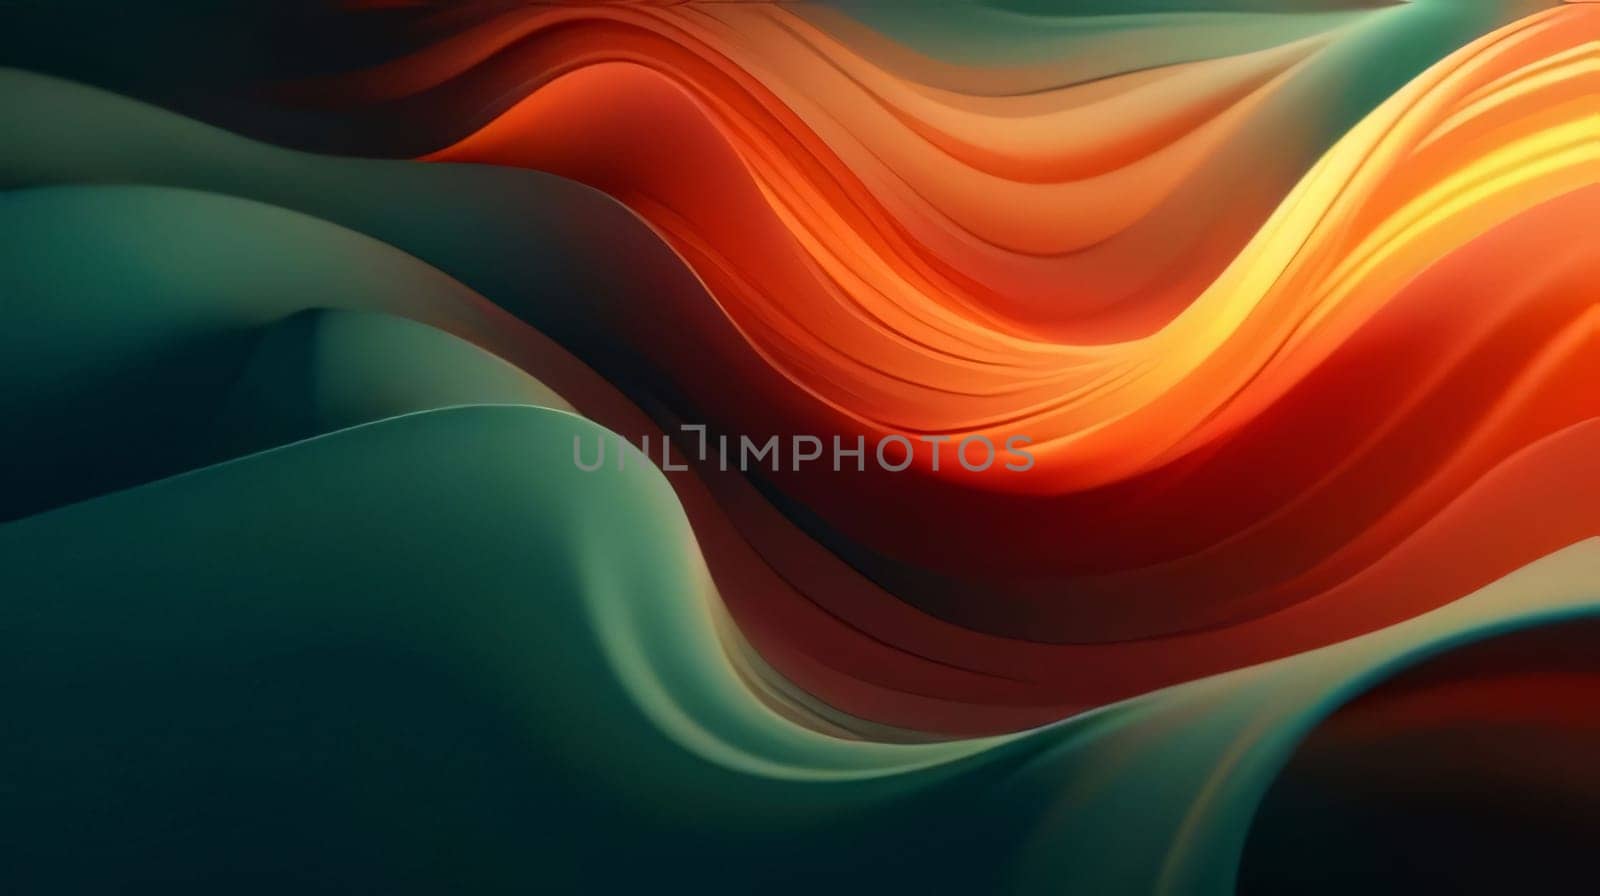 Abstract background design: 3d rendering of abstract wavy background. Computer generated illustration.